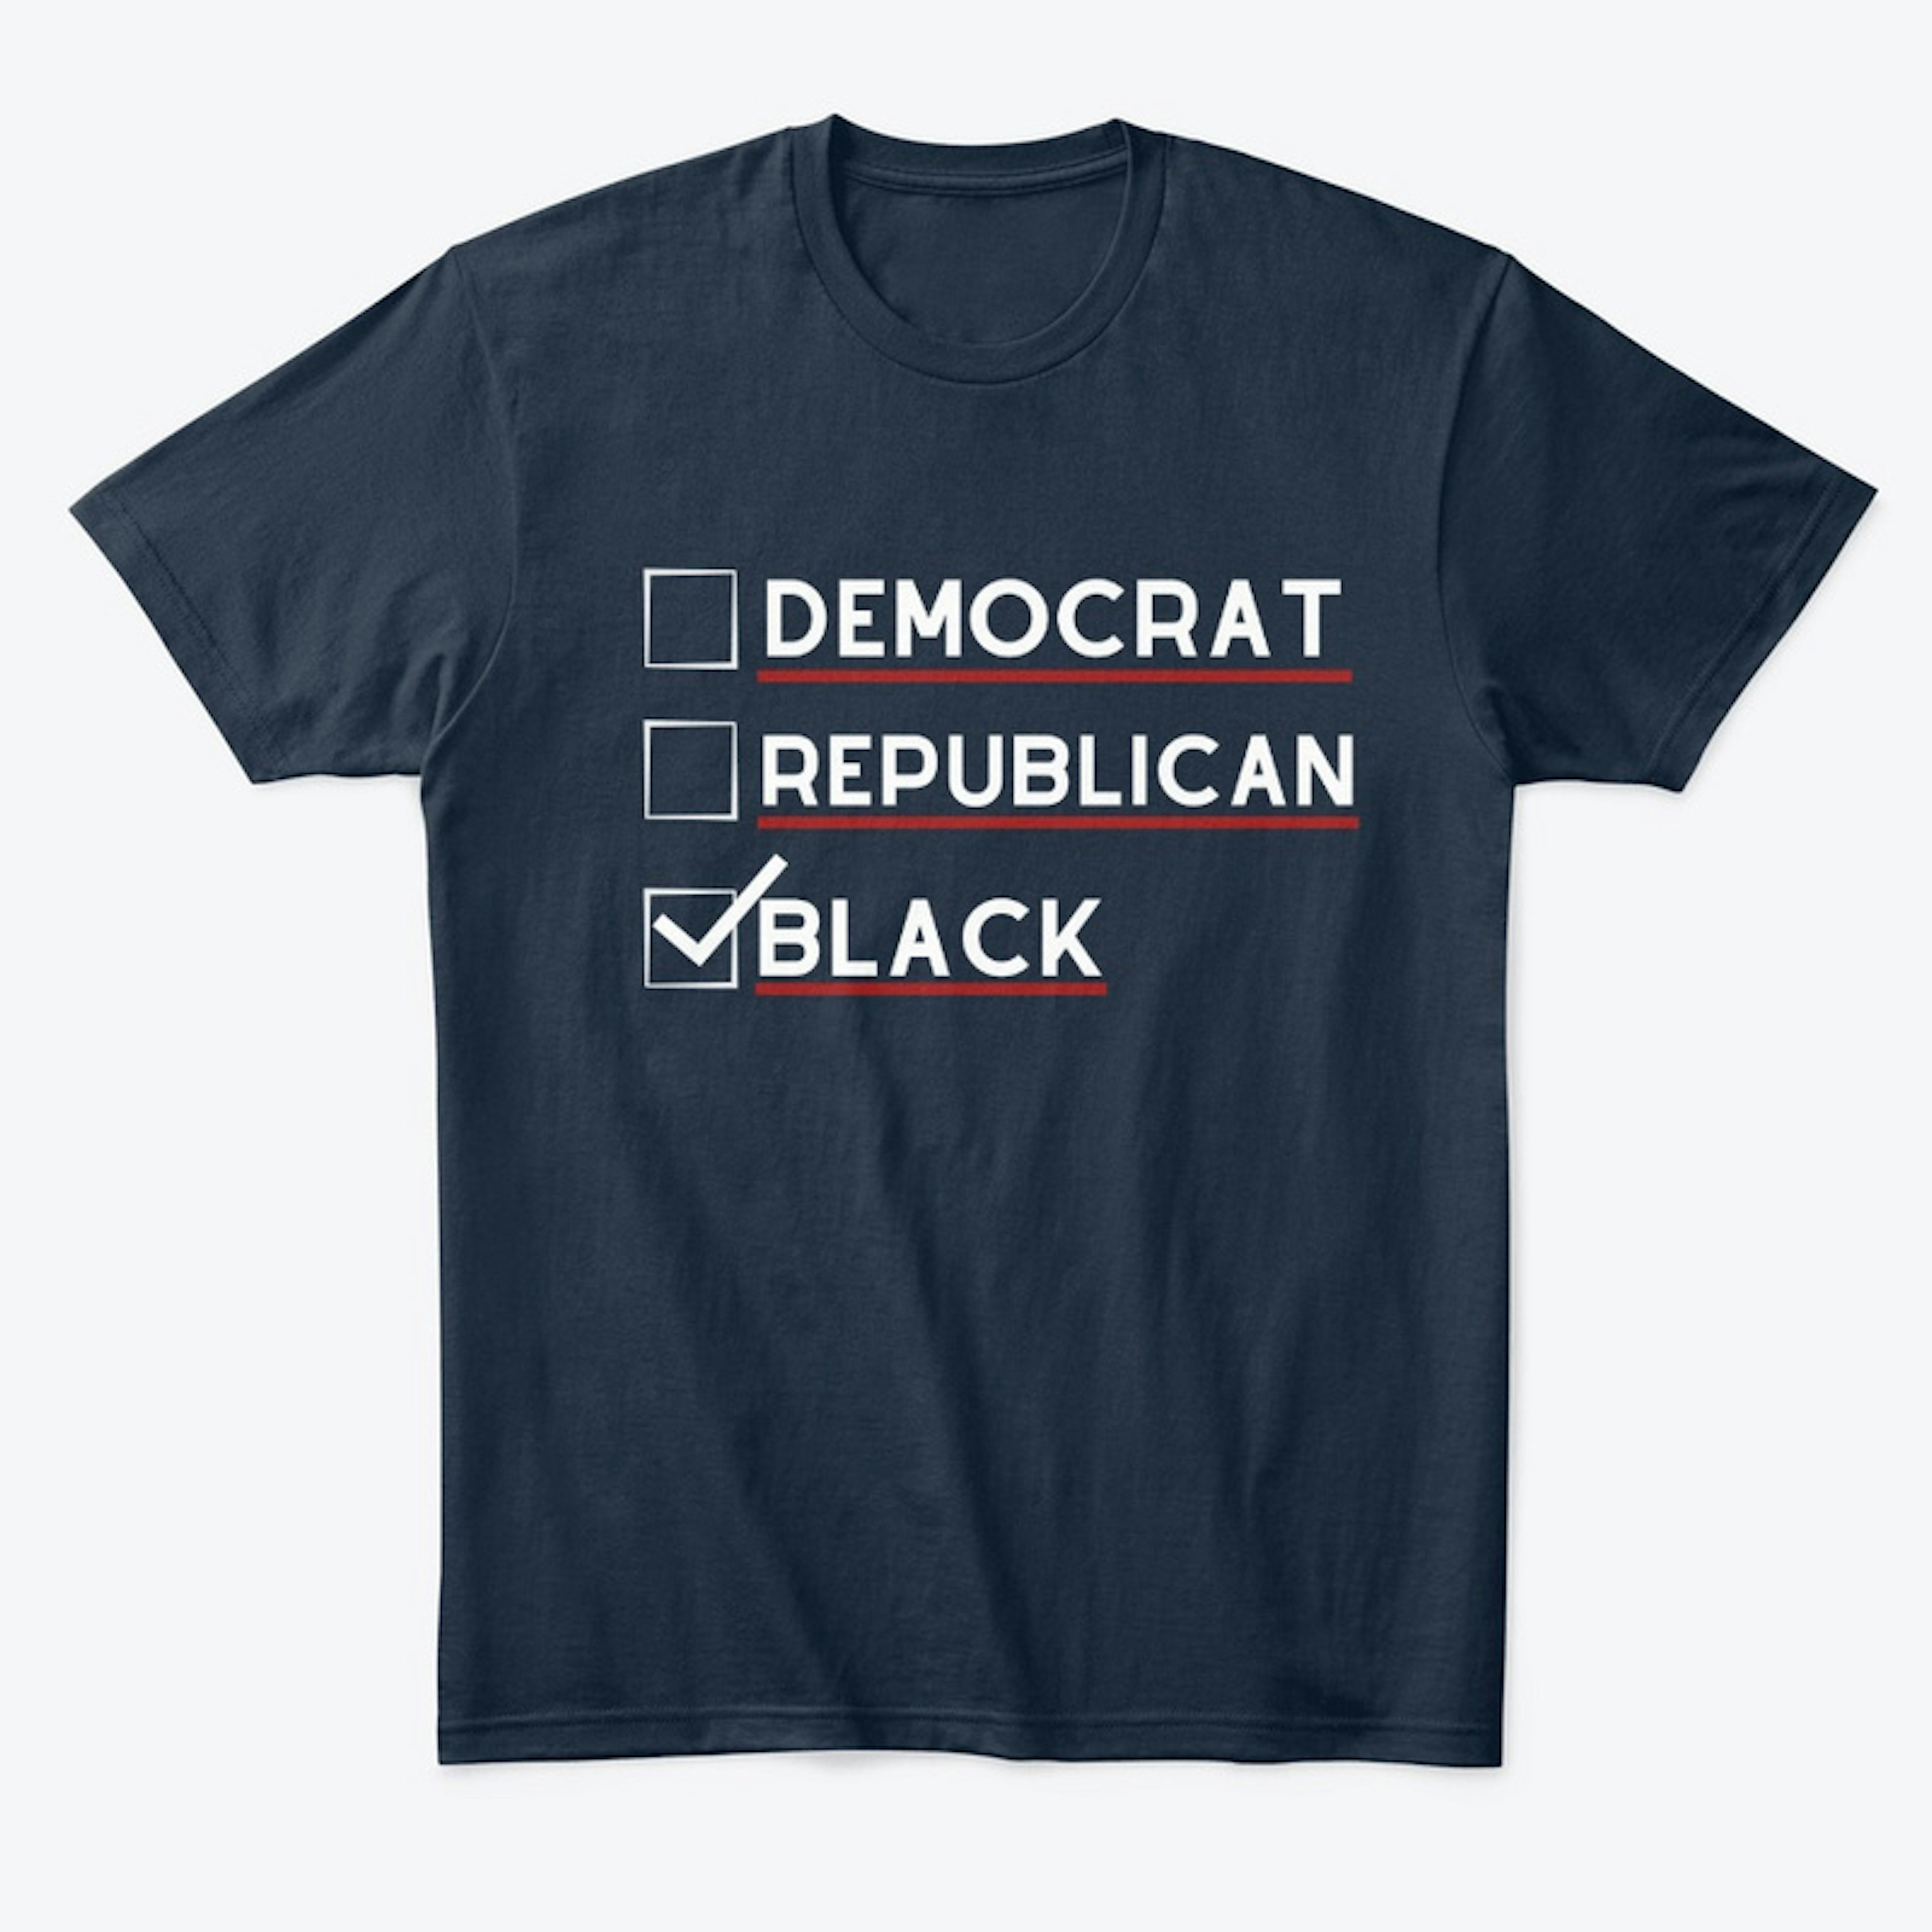 My Political Party Tees